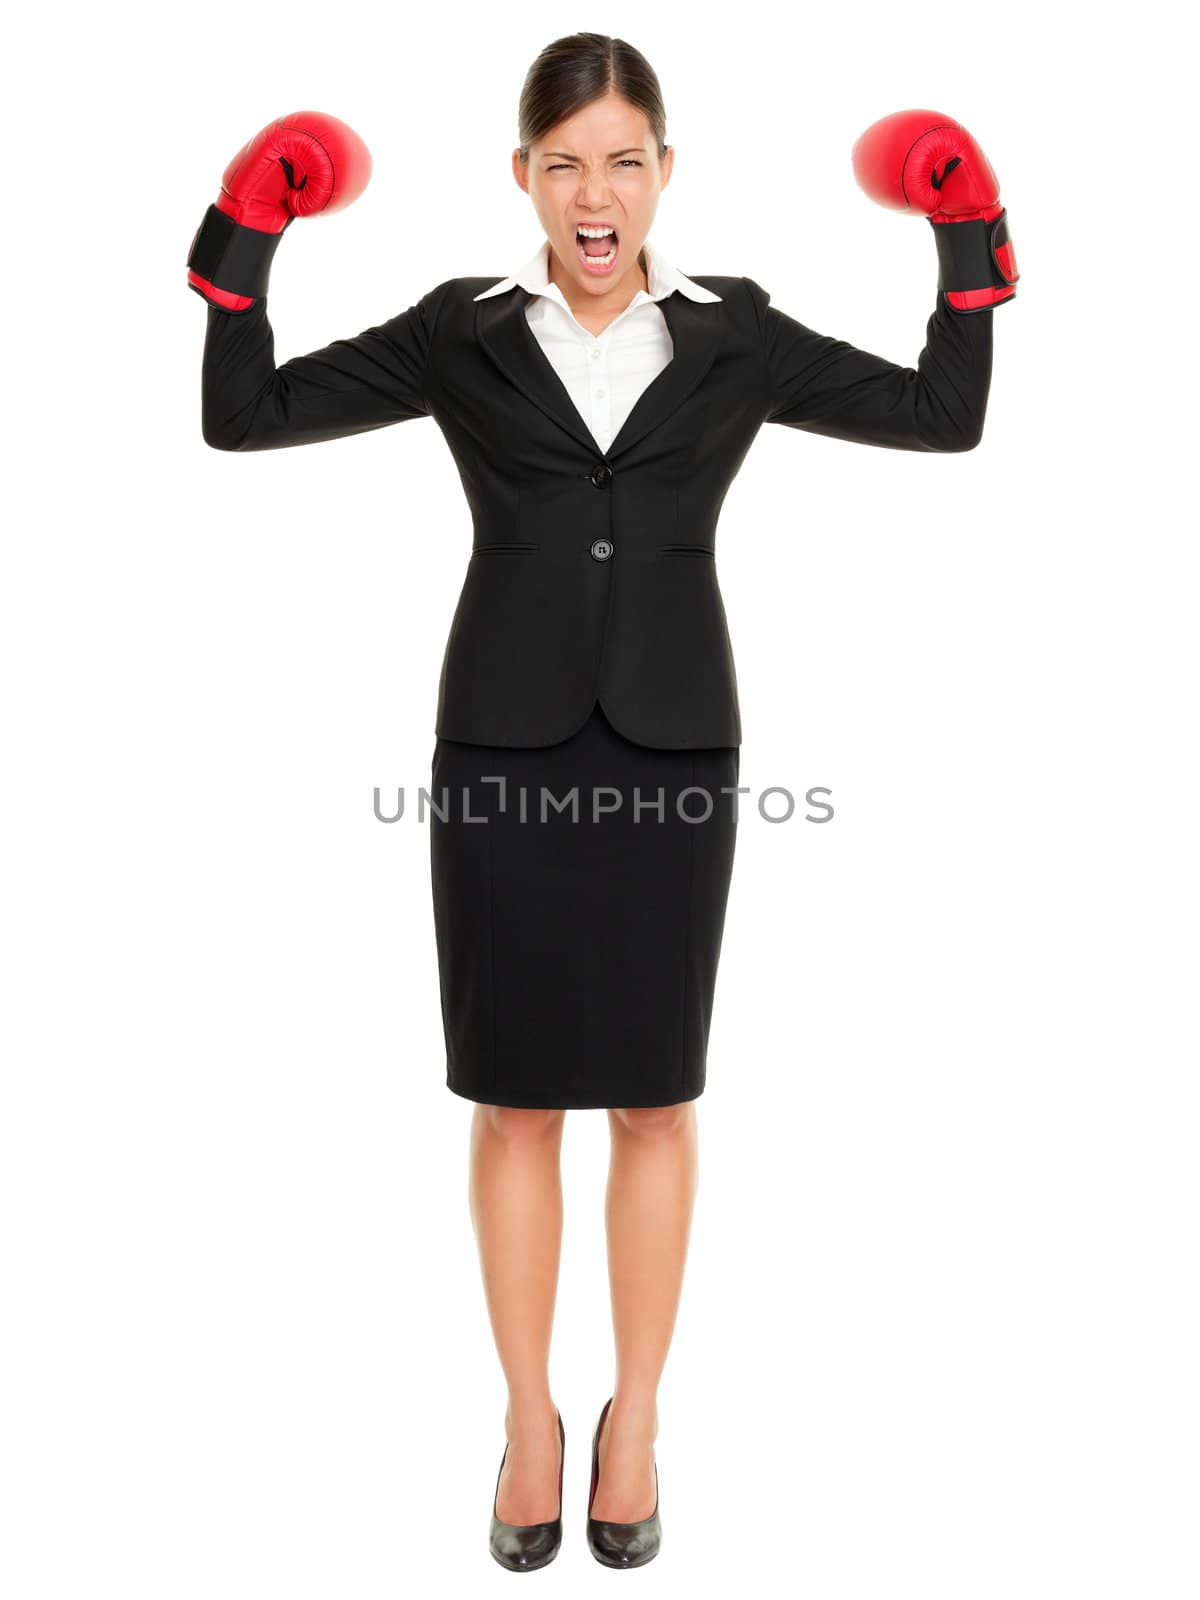 Strong aggressive business woman concept by Maridav